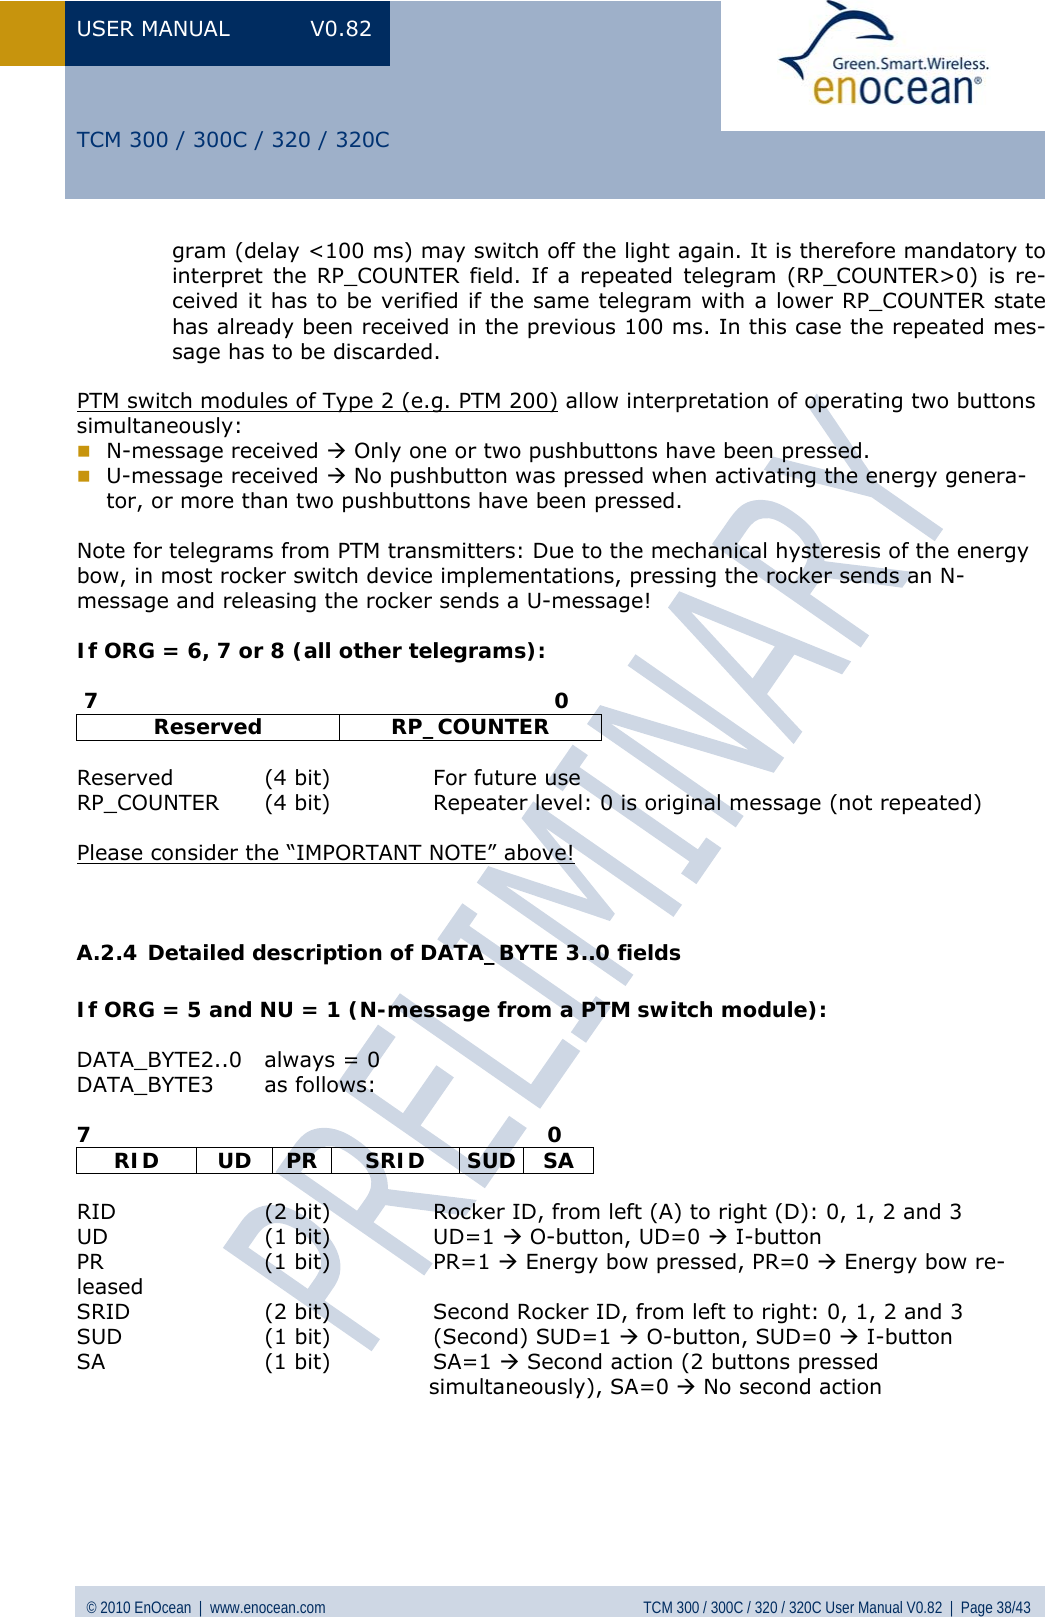 USER MANUAL V0.82 © 2010 EnOcean  |  www.enocean.com  TCM 300 / 300C / 320 / 320C User Manual V0.82  |  Page 38/43   TCM 300 / 300C / 320 / 320C gram (delay &lt;100 ms) may switch off the light again. It is therefore mandatory to interpret the RP_COUNTER field. If a repeated telegram (RP_COUNTER&gt;0) is re-ceived it has to be verified if the same telegram with a lower RP_COUNTER state has already been received in the previous 100 ms. In this case the repeated mes-sage has to be discarded.  PTM switch modules of Type 2 (e.g. PTM 200) allow interpretation of operating two buttons simultaneously:  N-message received Æ Only one or two pushbuttons have been pressed.  U-message received Æ No pushbutton was pressed when activating the energy genera-tor, or more than two pushbuttons have been pressed.  Note for telegrams from PTM transmitters: Due to the mechanical hysteresis of the energy bow, in most rocker switch device implementations, pressing the rocker sends an N-message and releasing the rocker sends a U-message!   If ORG = 6, 7 or 8 (all other telegrams):   7                                                                0 Reserved RP_COUNTER  Reserved  (4 bit)  For future use RP_COUNTER  (4 bit)  Repeater level: 0 is original message (not repeated)  Please consider the “IMPORTANT NOTE” above!   A.2.4 Detailed description of DATA_BYTE 3..0 fields  If ORG = 5 and NU = 1 (N-message from a PTM switch module):  DATA_BYTE2..0  always = 0 DATA_BYTE3 as follows:  7                                                                0 RID UD PR SRID SUD SA  RID  (2 bit)  Rocker ID, from left (A) to right (D): 0, 1, 2 and 3  UD (1 bit) UD=1 Æ O-button, UD=0 Æ I-button PR (1 bit) PR=1 Æ Energy bow pressed, PR=0 Æ Energy bow re-leased SRID  (2 bit)  Second Rocker ID, from left to right: 0, 1, 2 and 3 SUD  (1 bit)  (Second) SUD=1 Æ O-button, SUD=0 Æ I-button SA (1 bit) SA=1 Æ Second action (2 buttons pressed                                                  simultaneously), SA=0 Æ No second action      